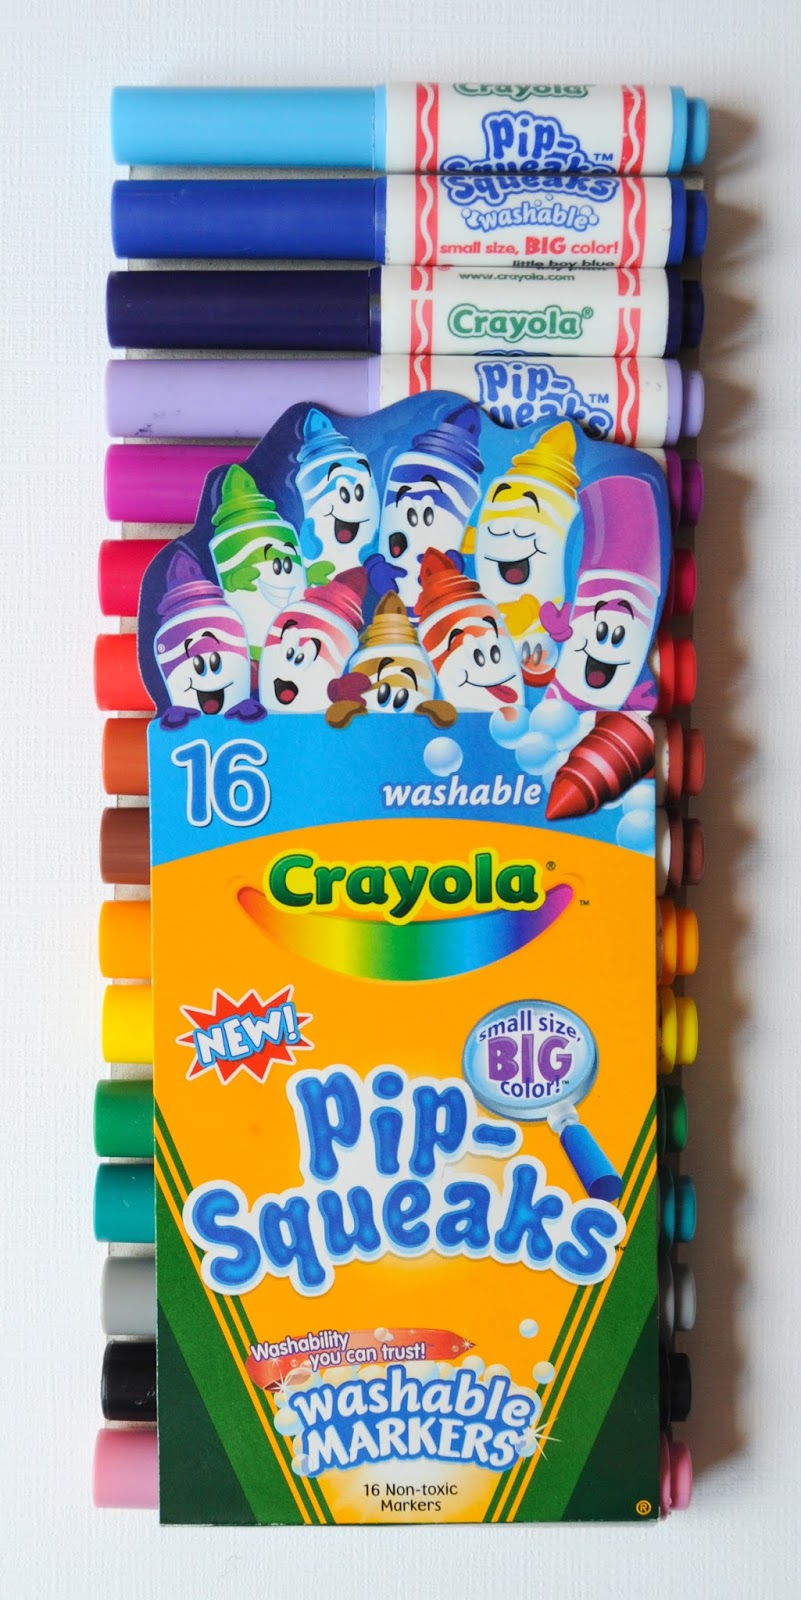 Crayola Pip Squeaks Markers (64 Count), Kids Washable Markers for